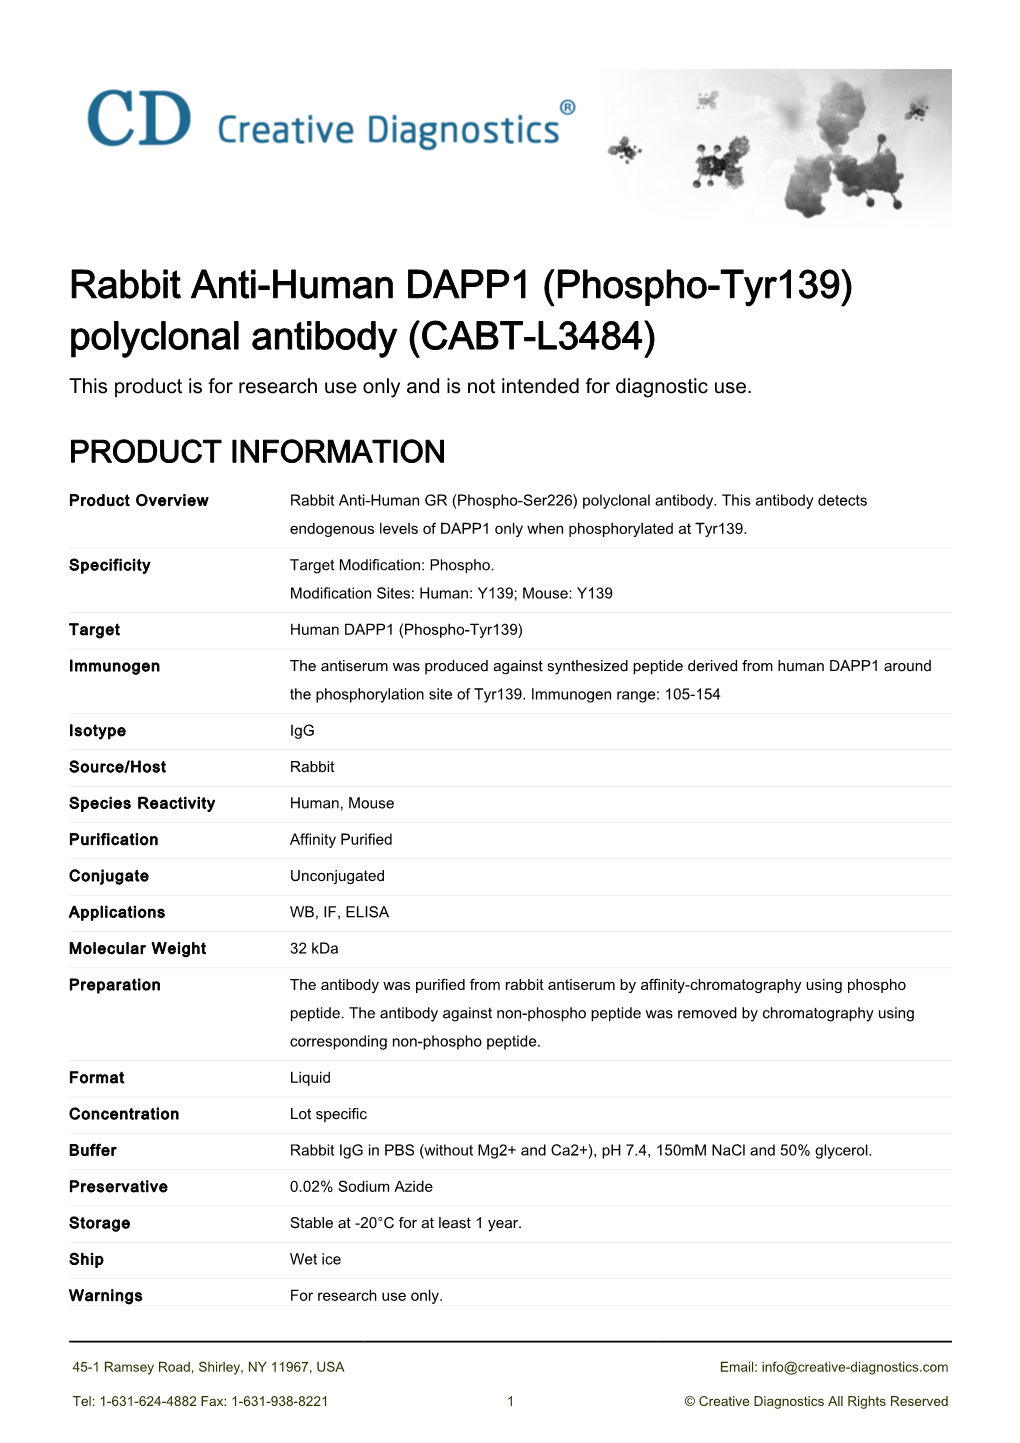 Rabbit Anti-Human DAPP1 (Phospho-Tyr139) Polyclonal Antibody (CABT-L3484) This Product Is for Research Use Only and Is Not Intended for Diagnostic Use